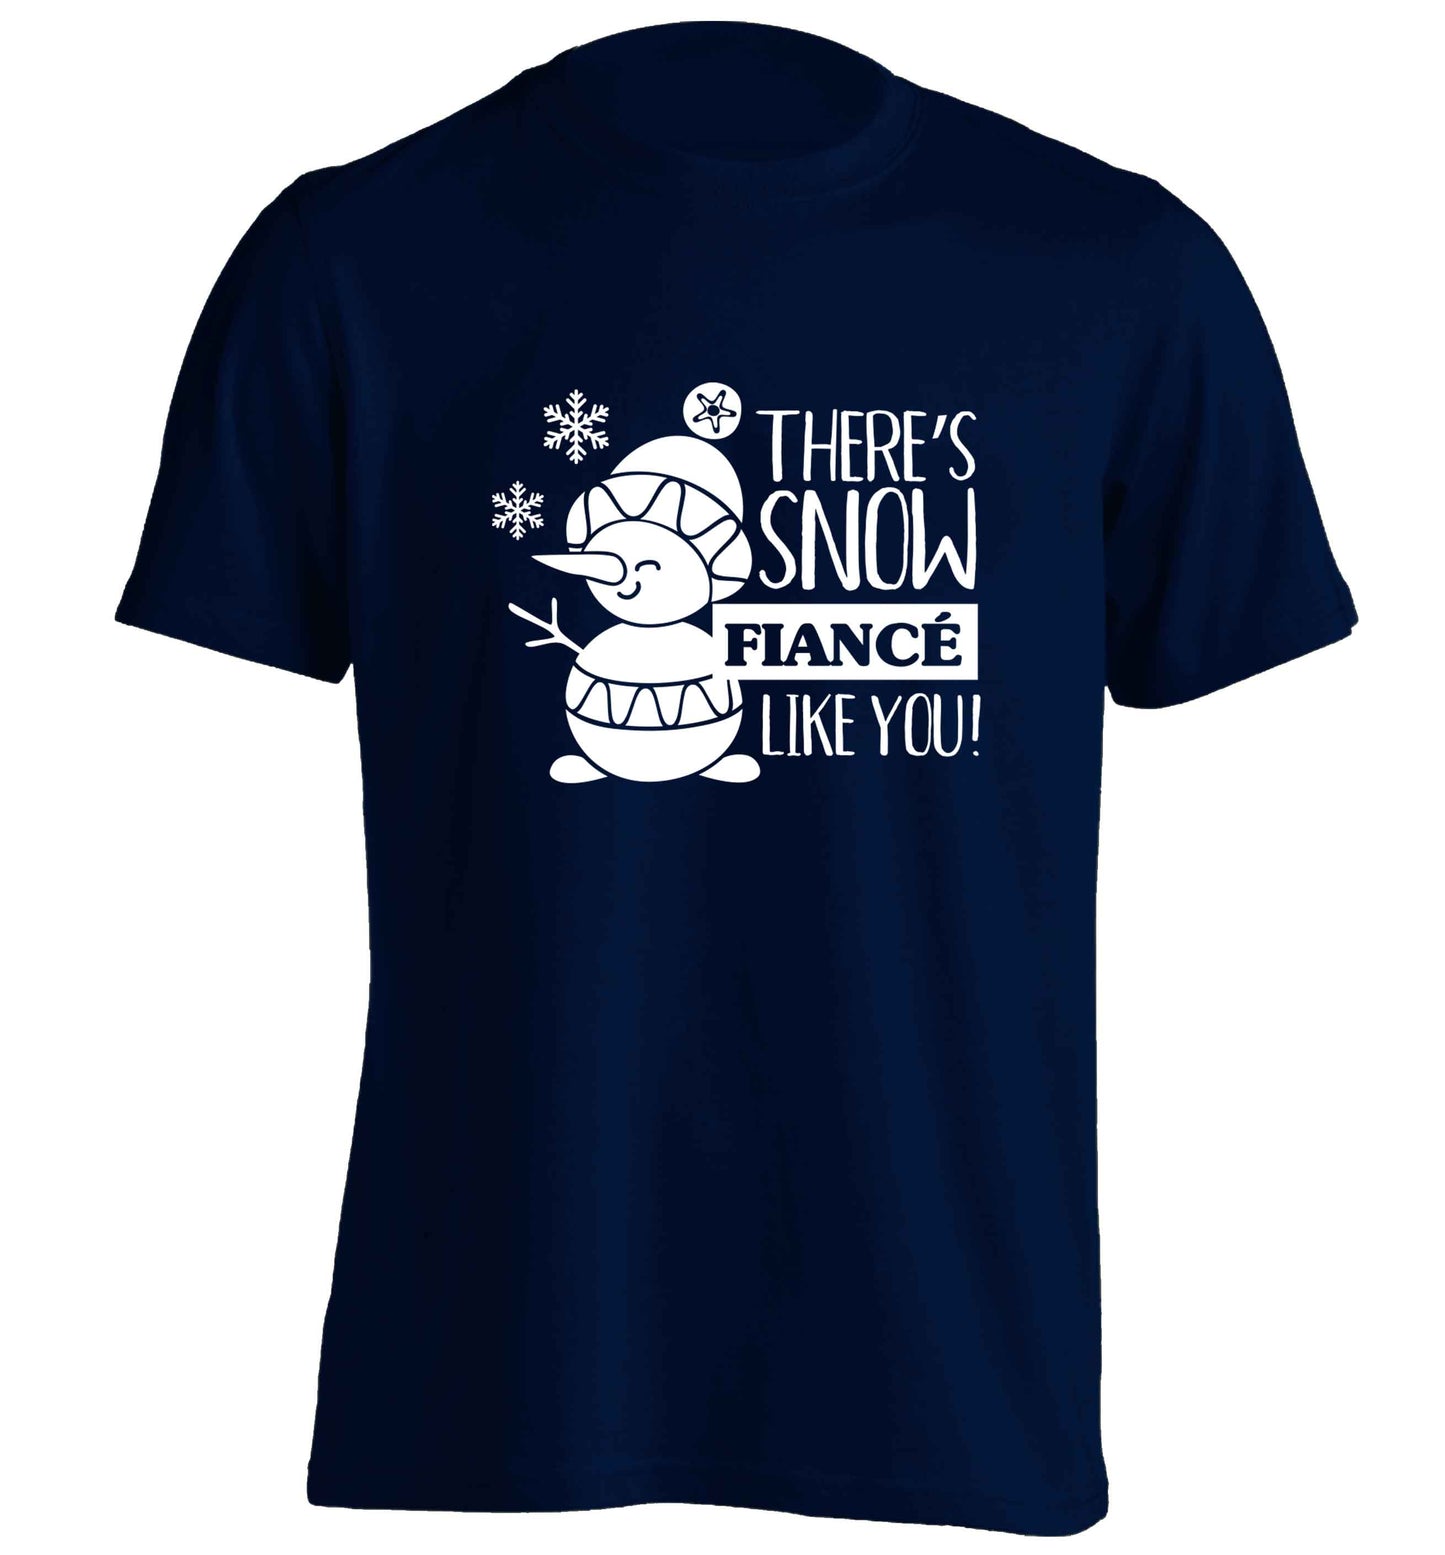 There's snow fiance like you adults unisex navy Tshirt 2XL